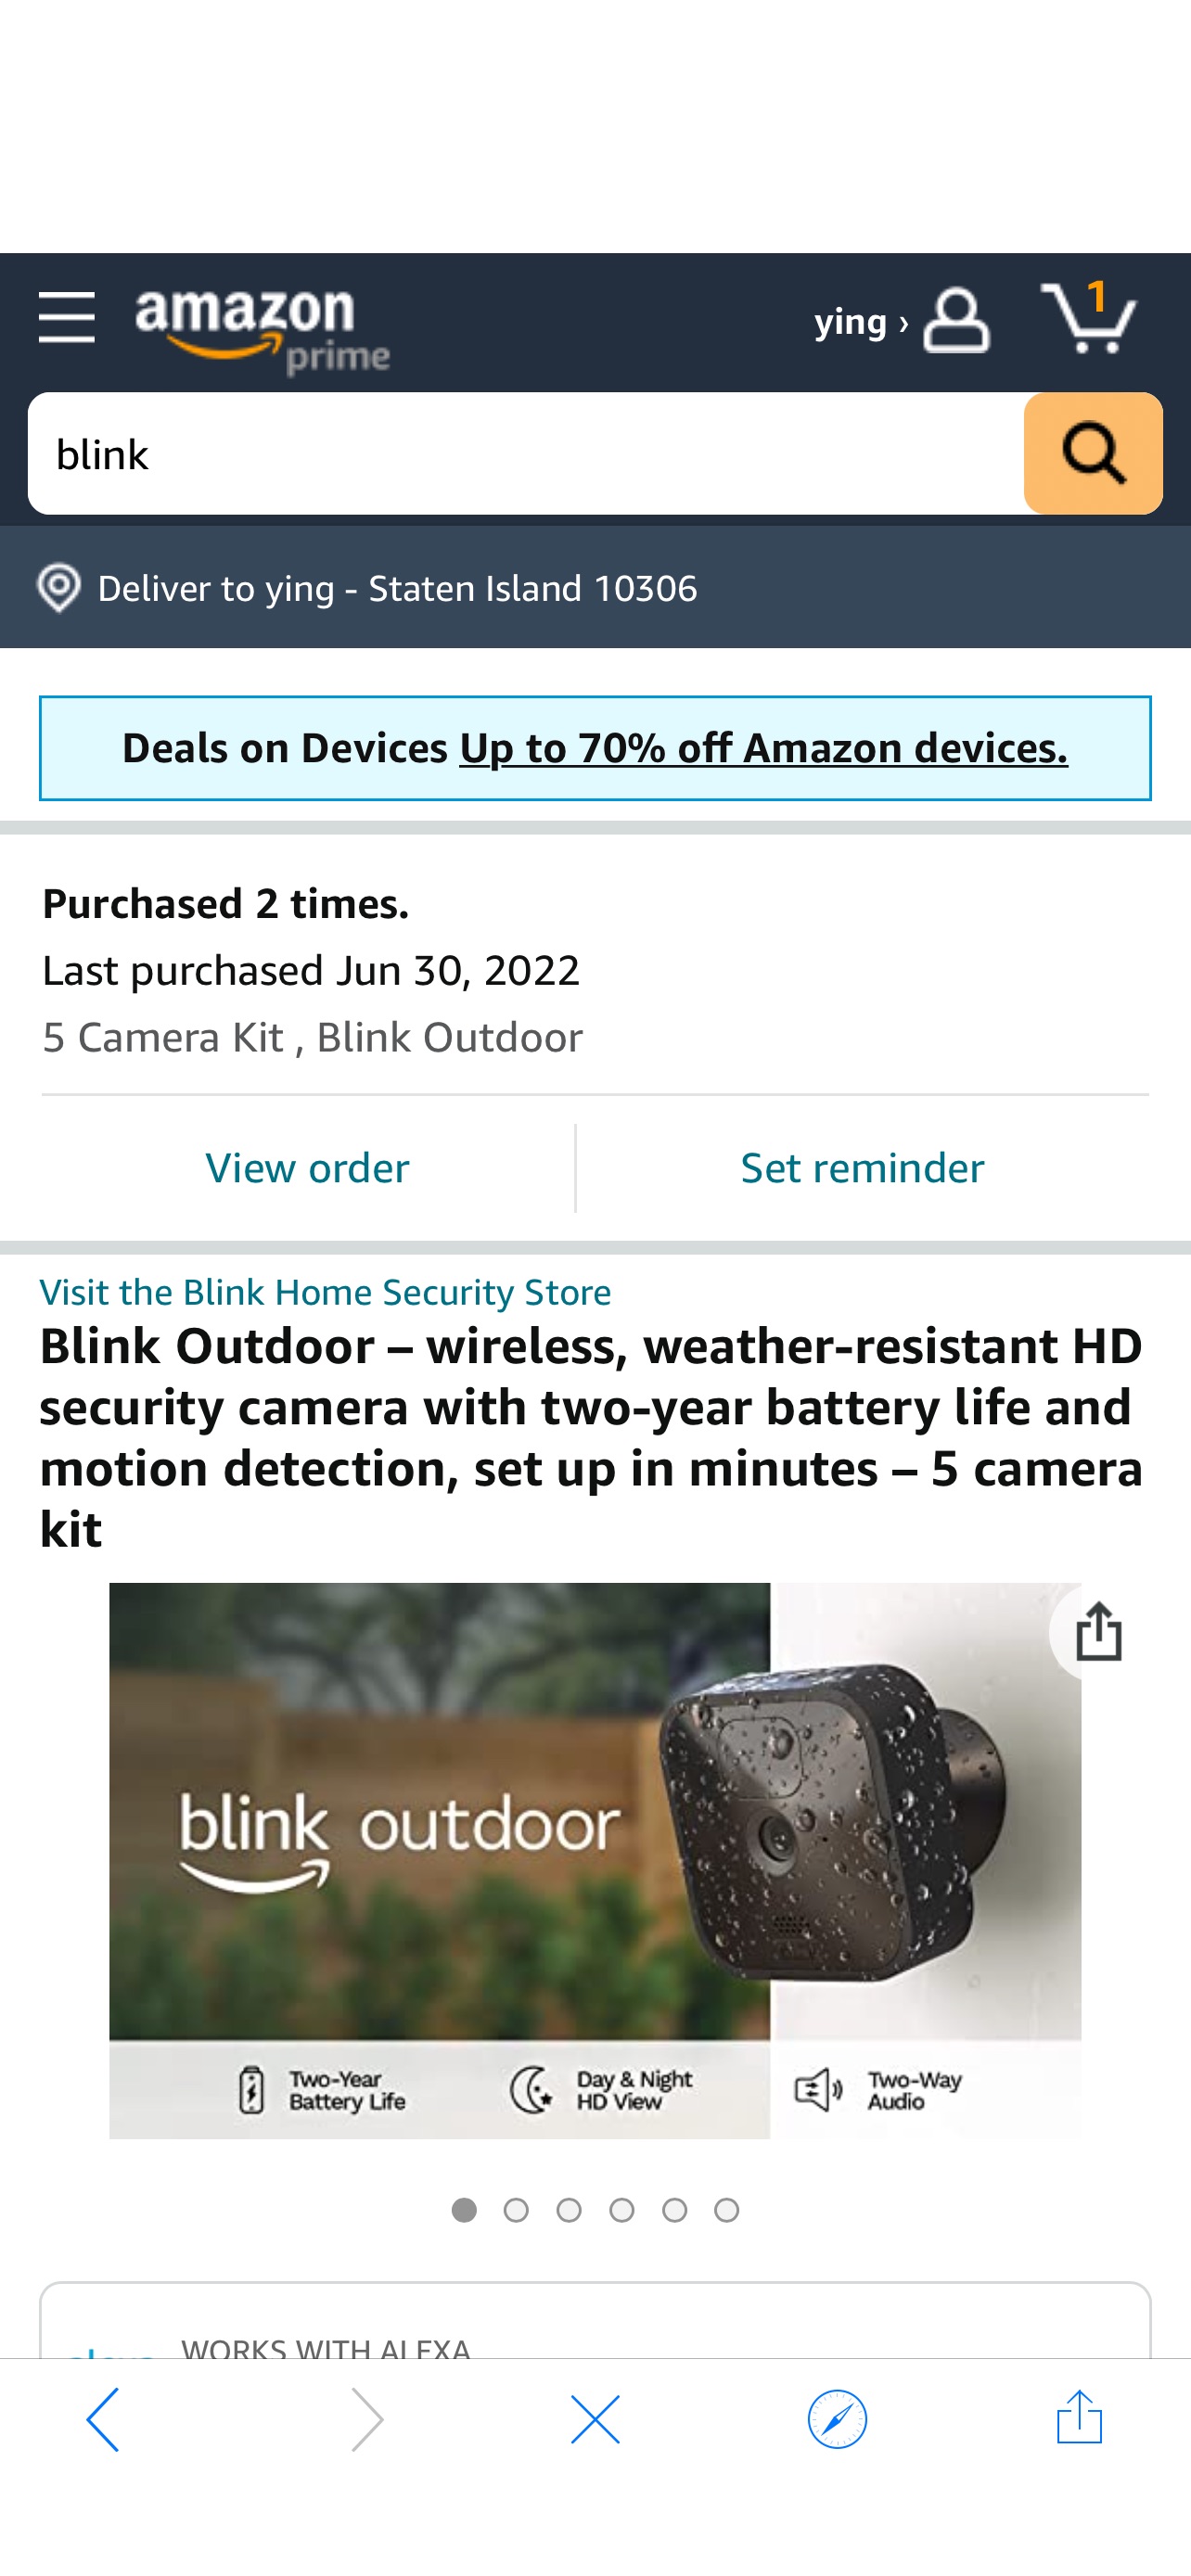 Amazon.com: Blink Outdoor – wireless, weather-resistant HD security camera with two-year battery life and motion detection, set up in minutes – 5 camera kit : Amazon Devices & Accessories